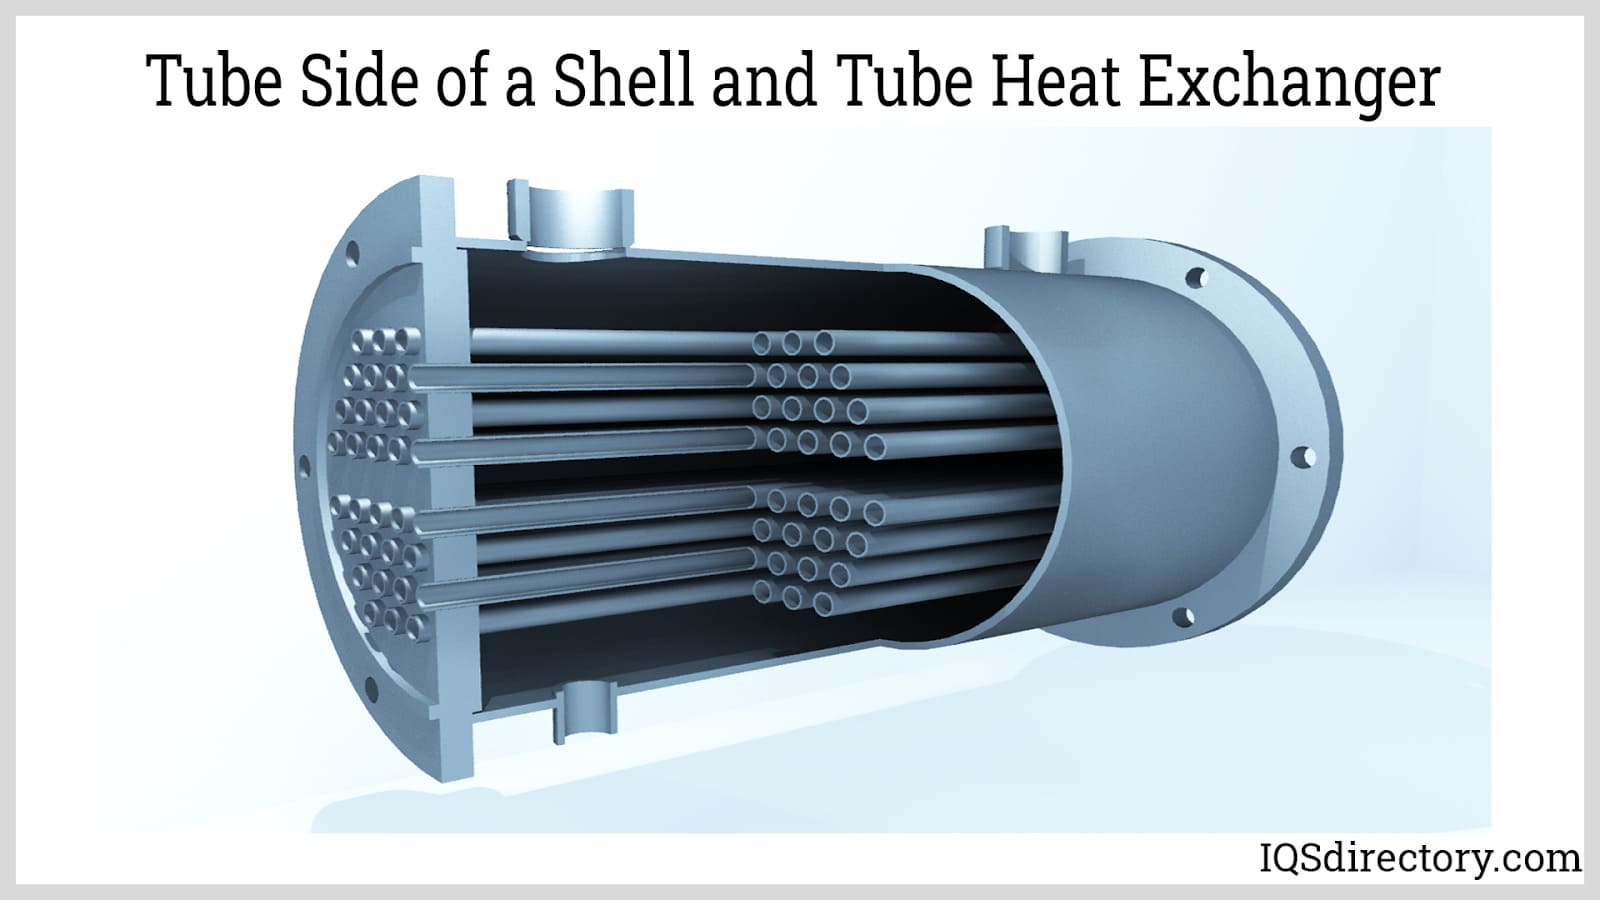 Tube Side of a Shell and Tube Heat Exchanger